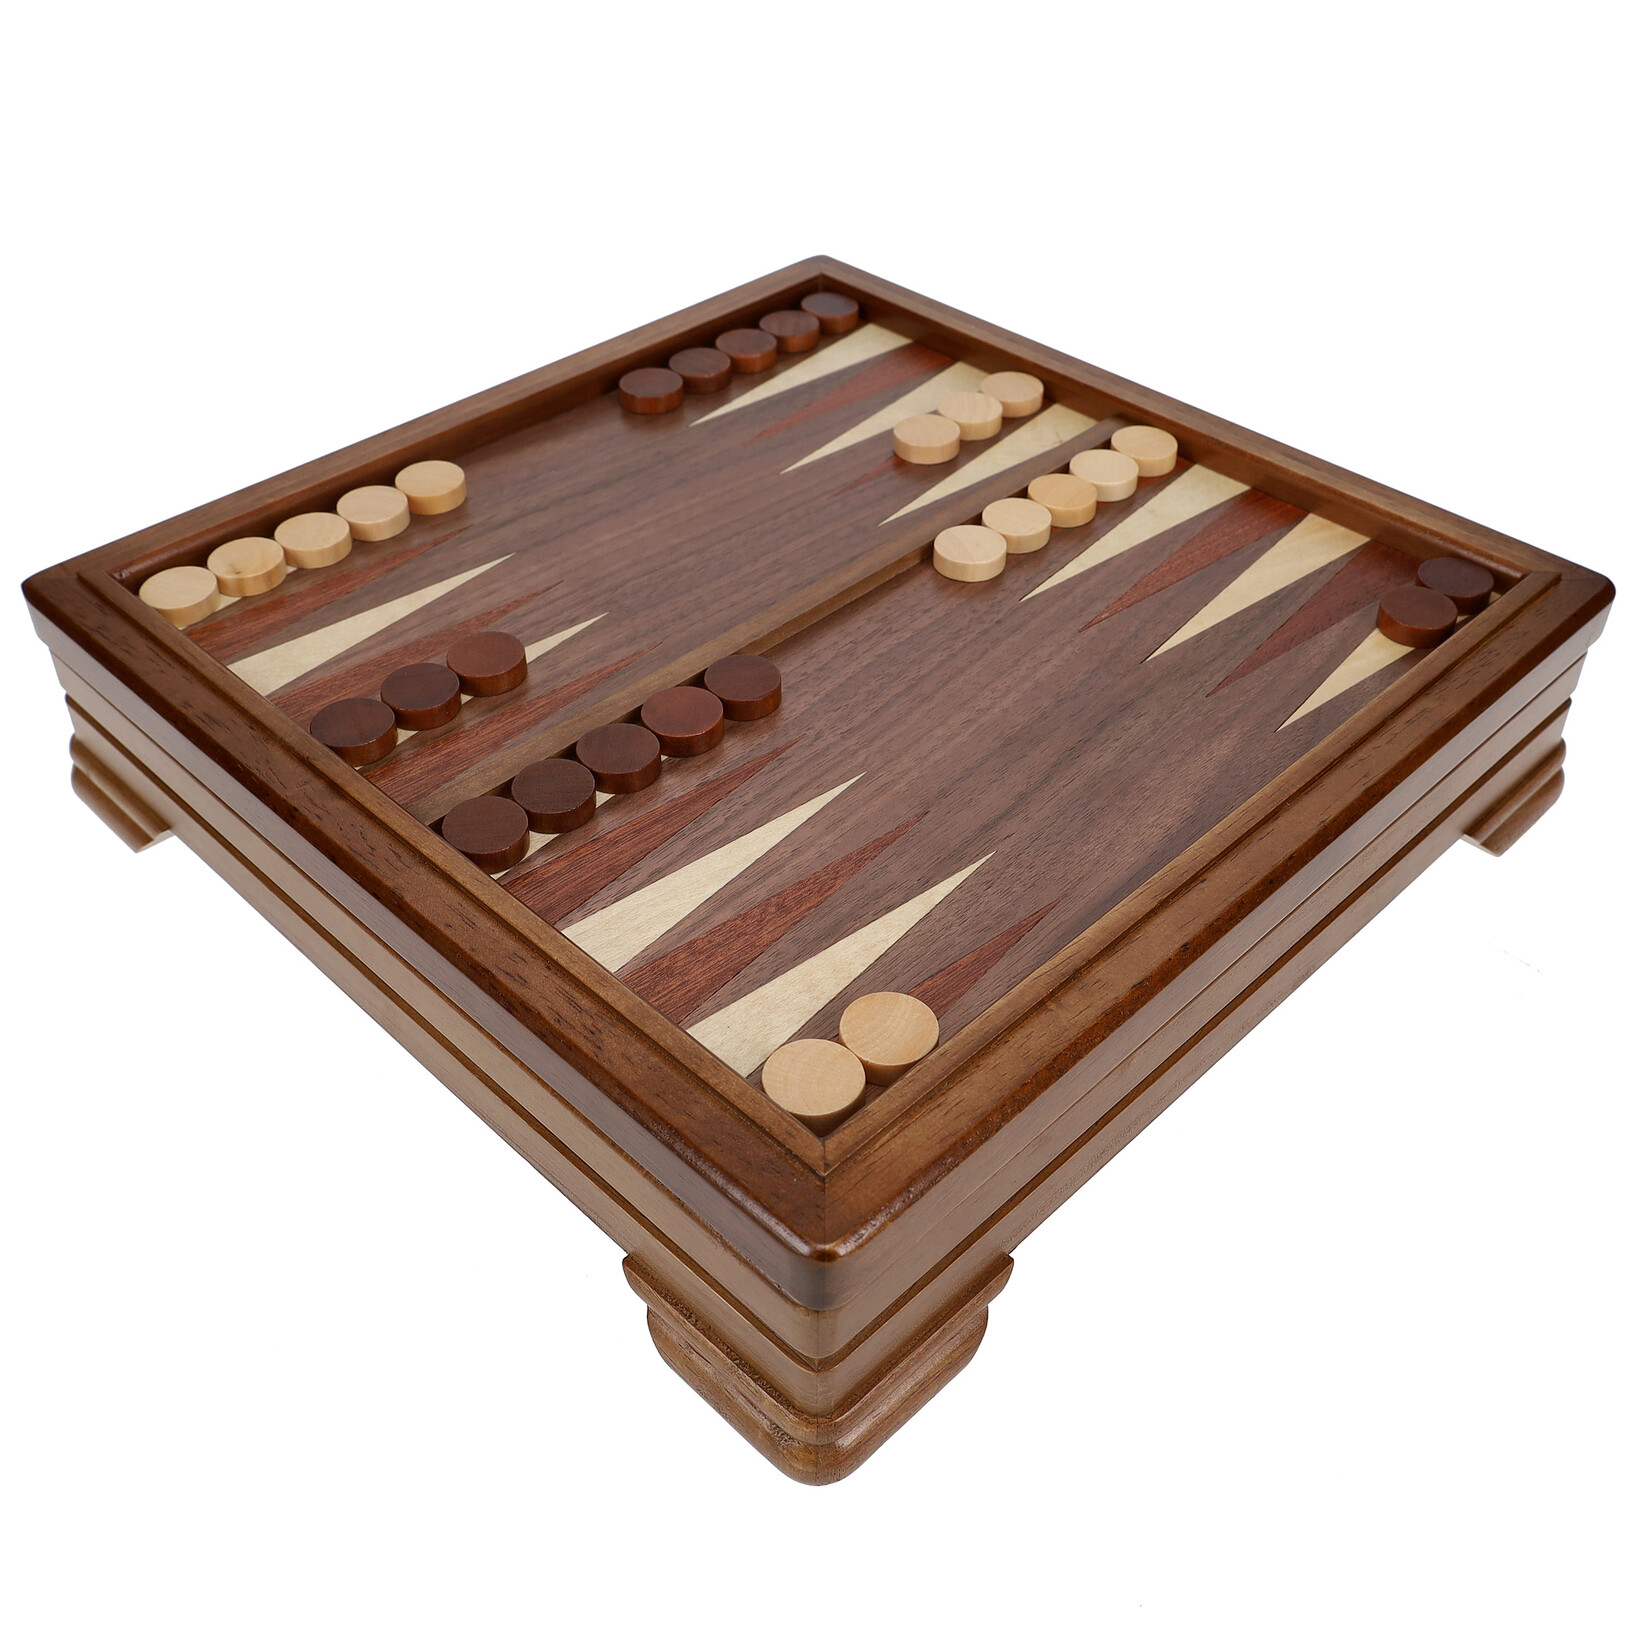 Wood Expressions 7-Games-in-1 Game Set (Walnut)